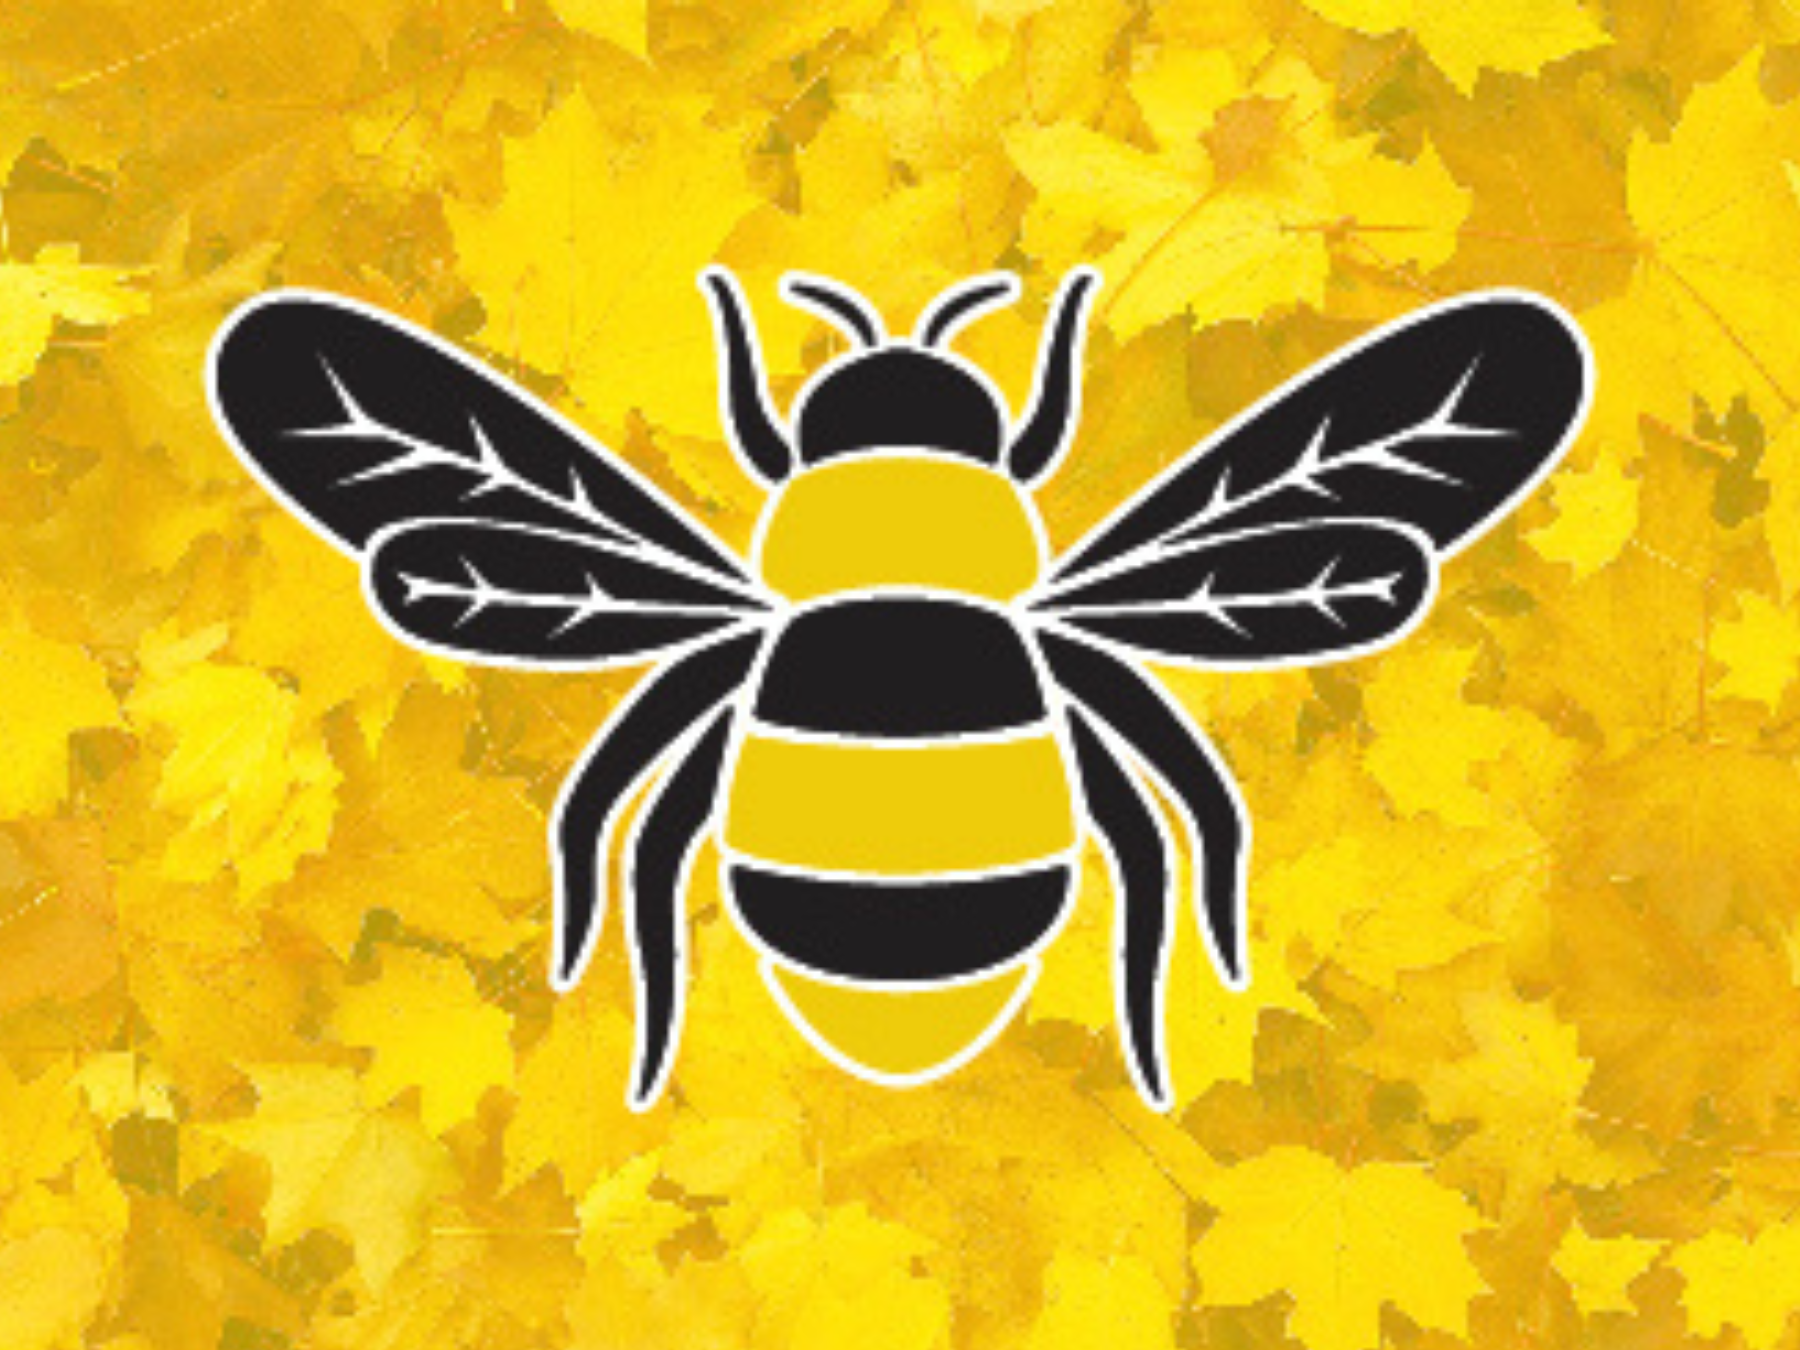 A graphic illustration of a bumblebee with black and yellow stripes, set against a background of yellow maple leaves.